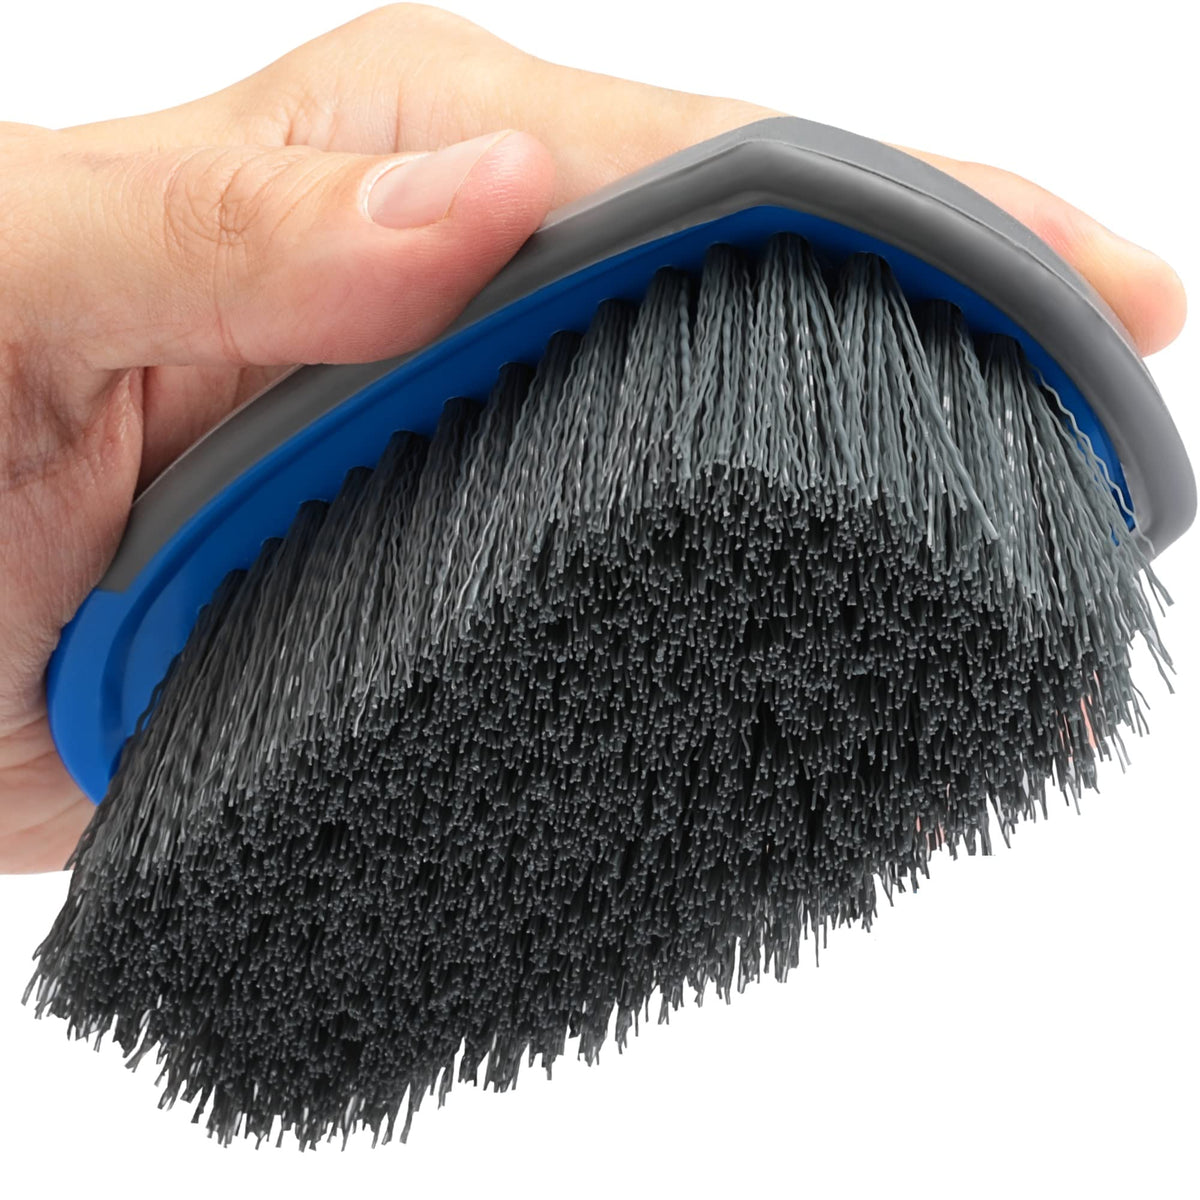 Relentless Drive Upholstery Brush Works as Carpet Brush and Leather Br